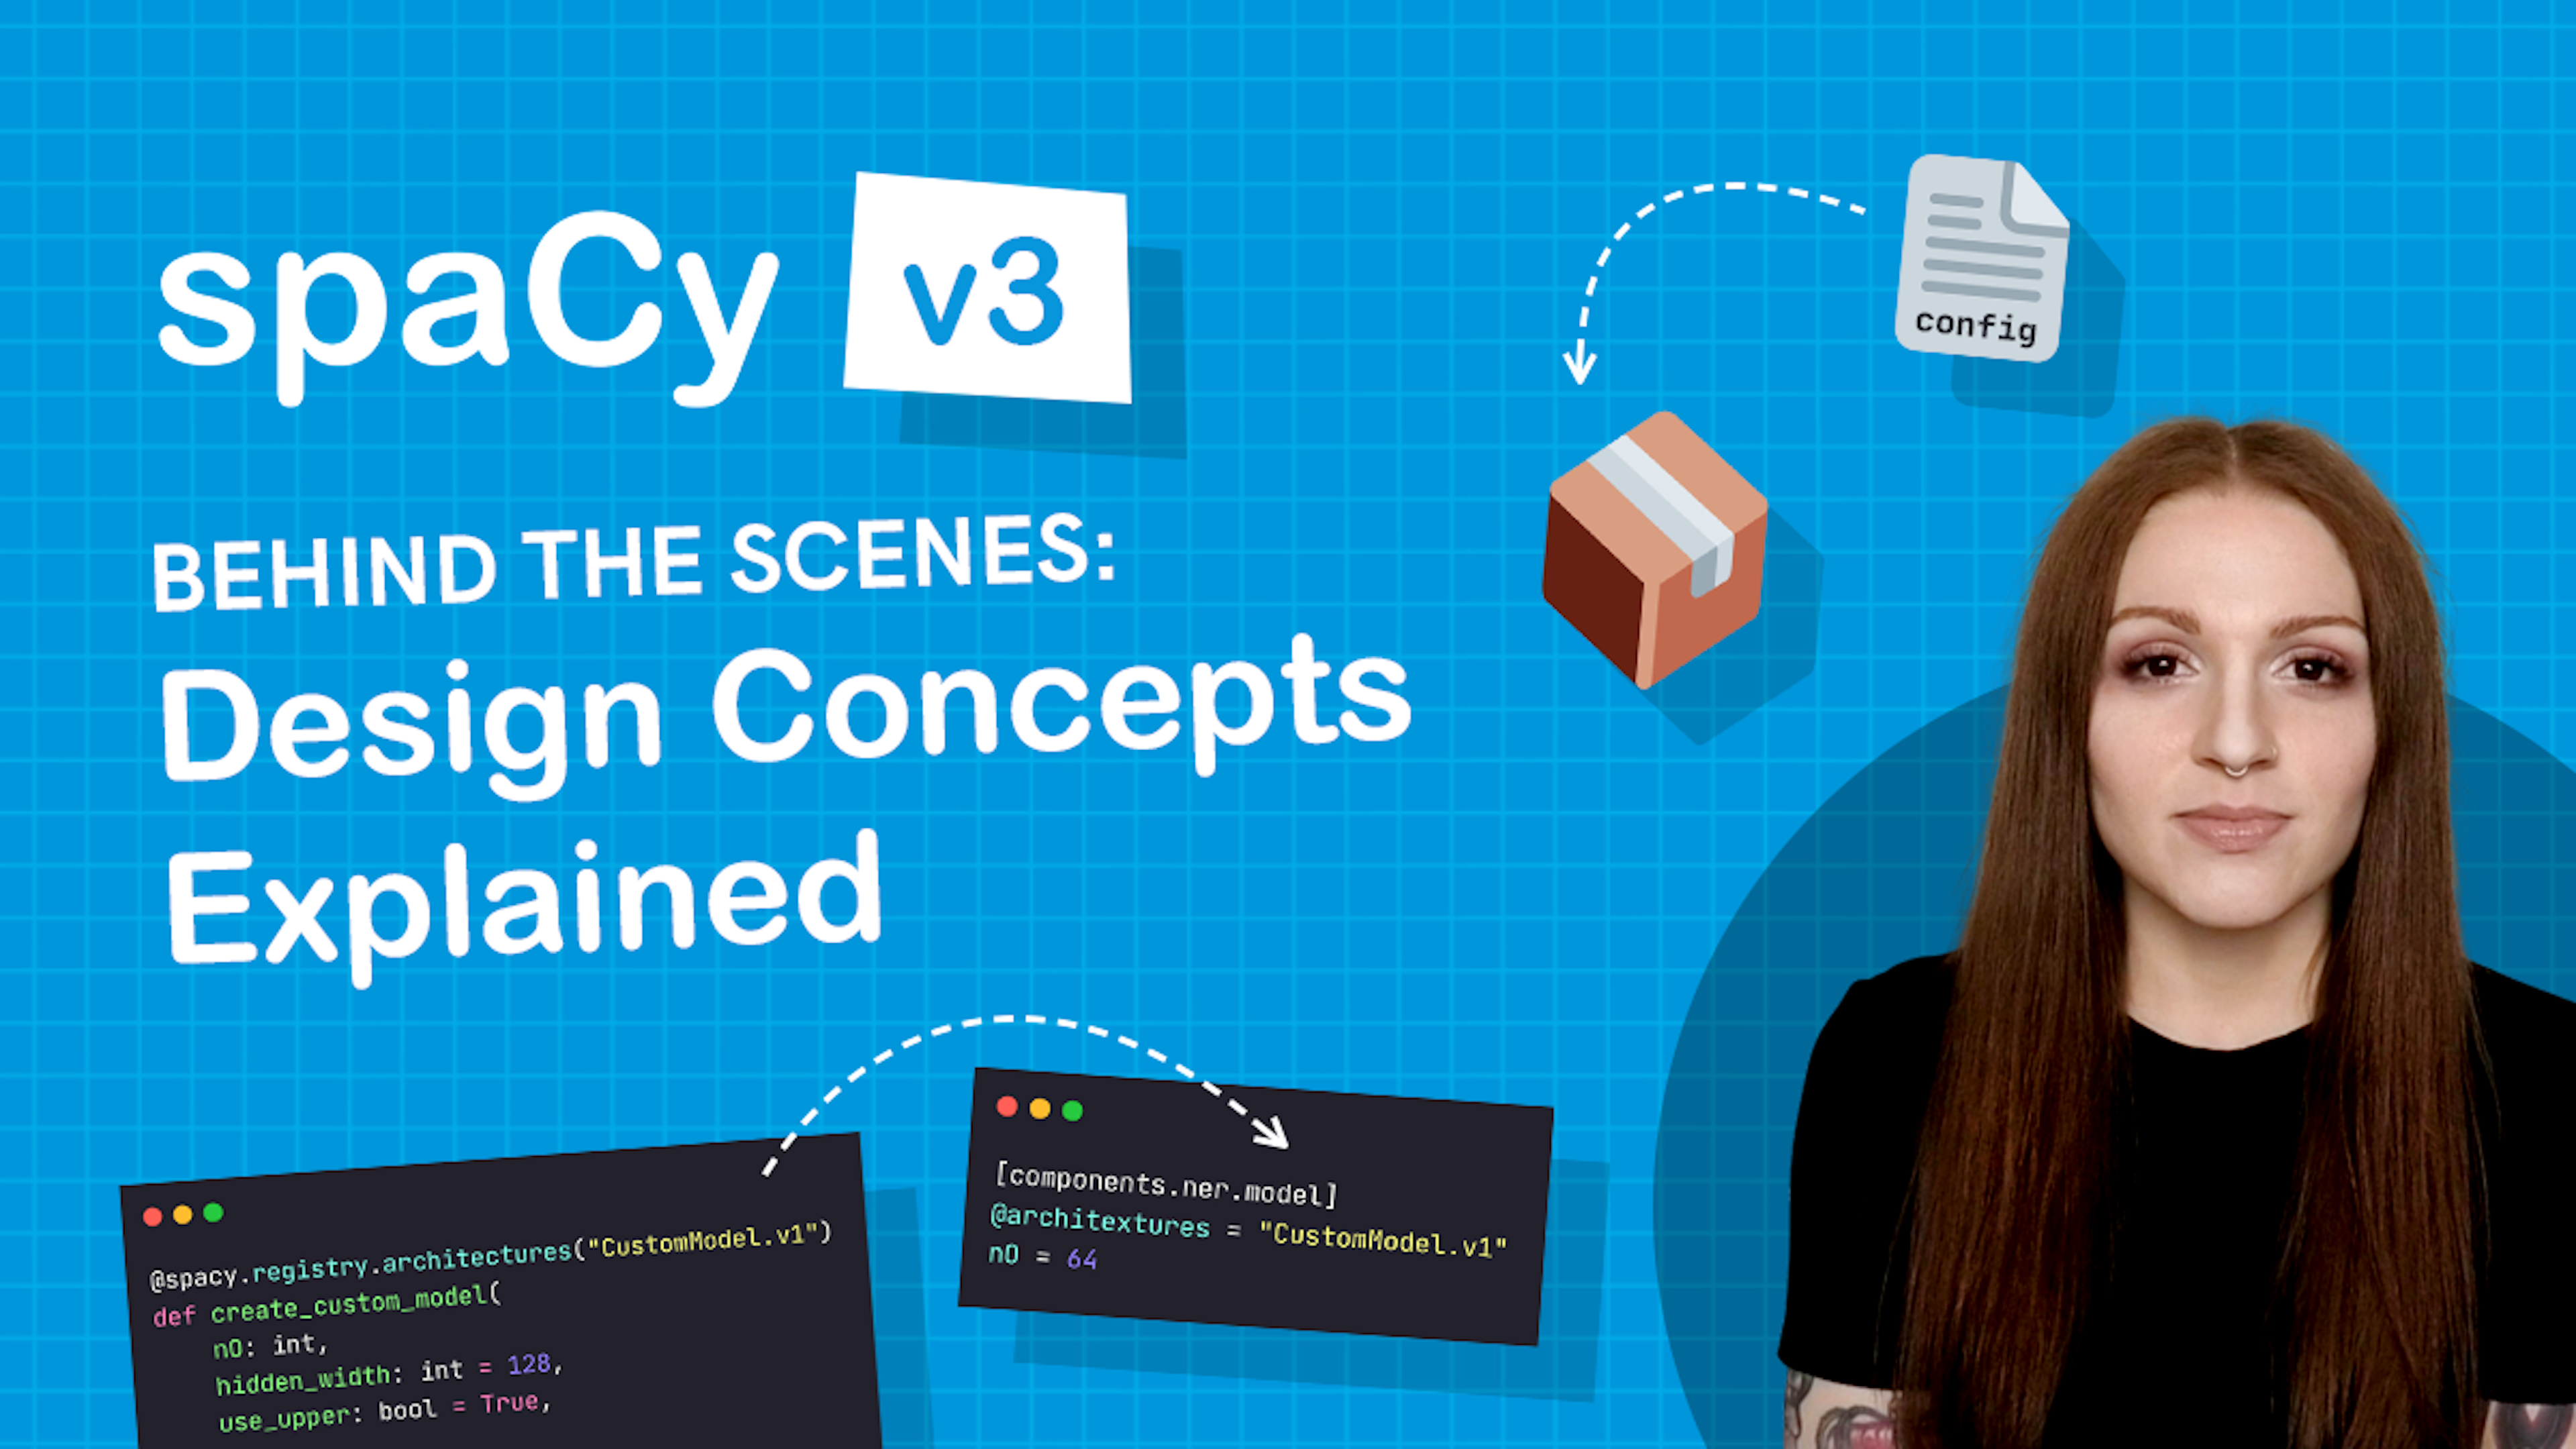 spaCy v3: Design concepts explained (behind the scenes)